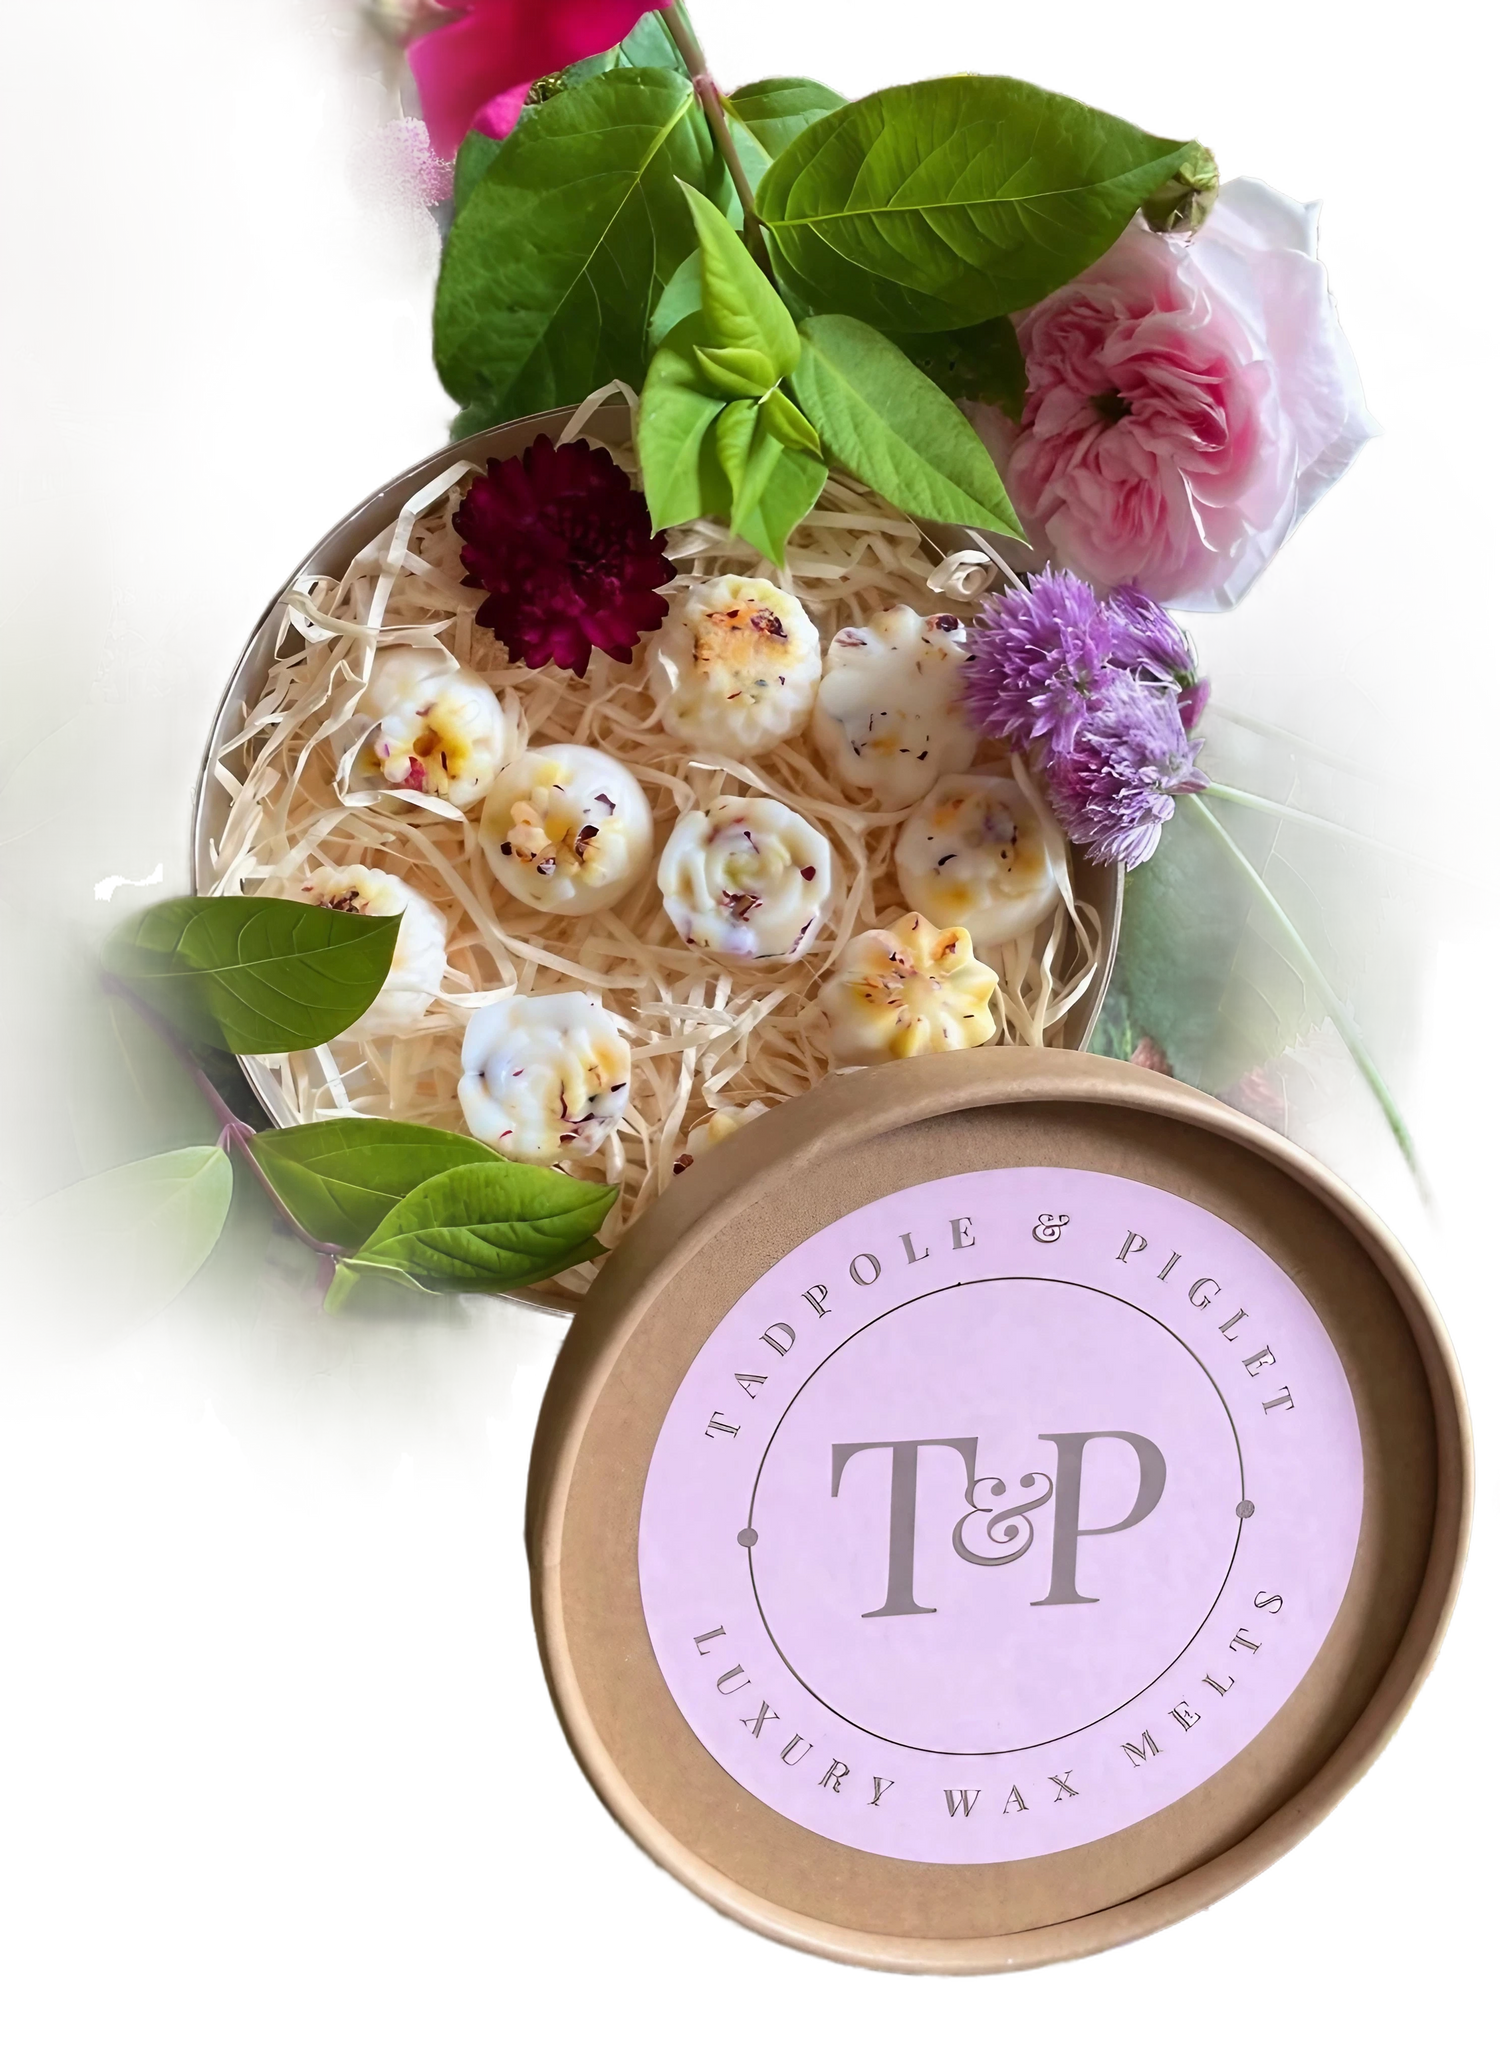 Cottage Garden Botanical Wax Melts in a pink box with a branded label